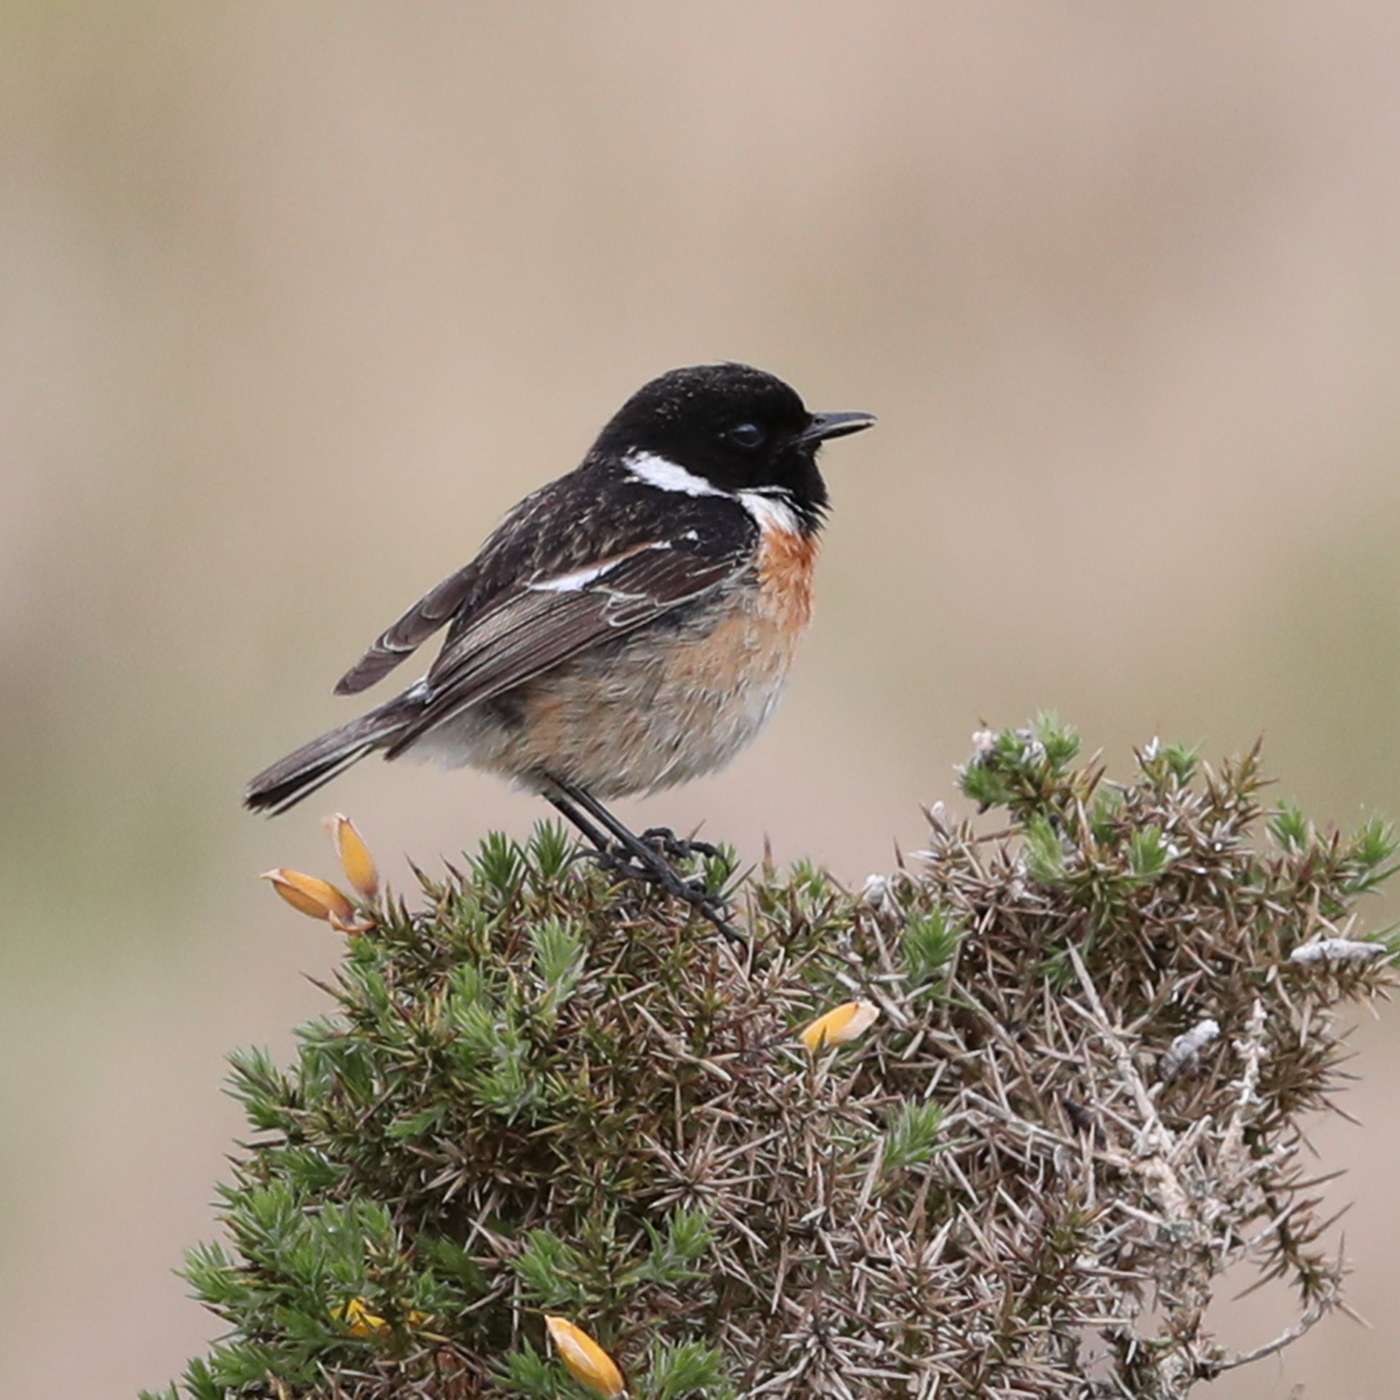 Stonechat by Steve Hopper at South Brent